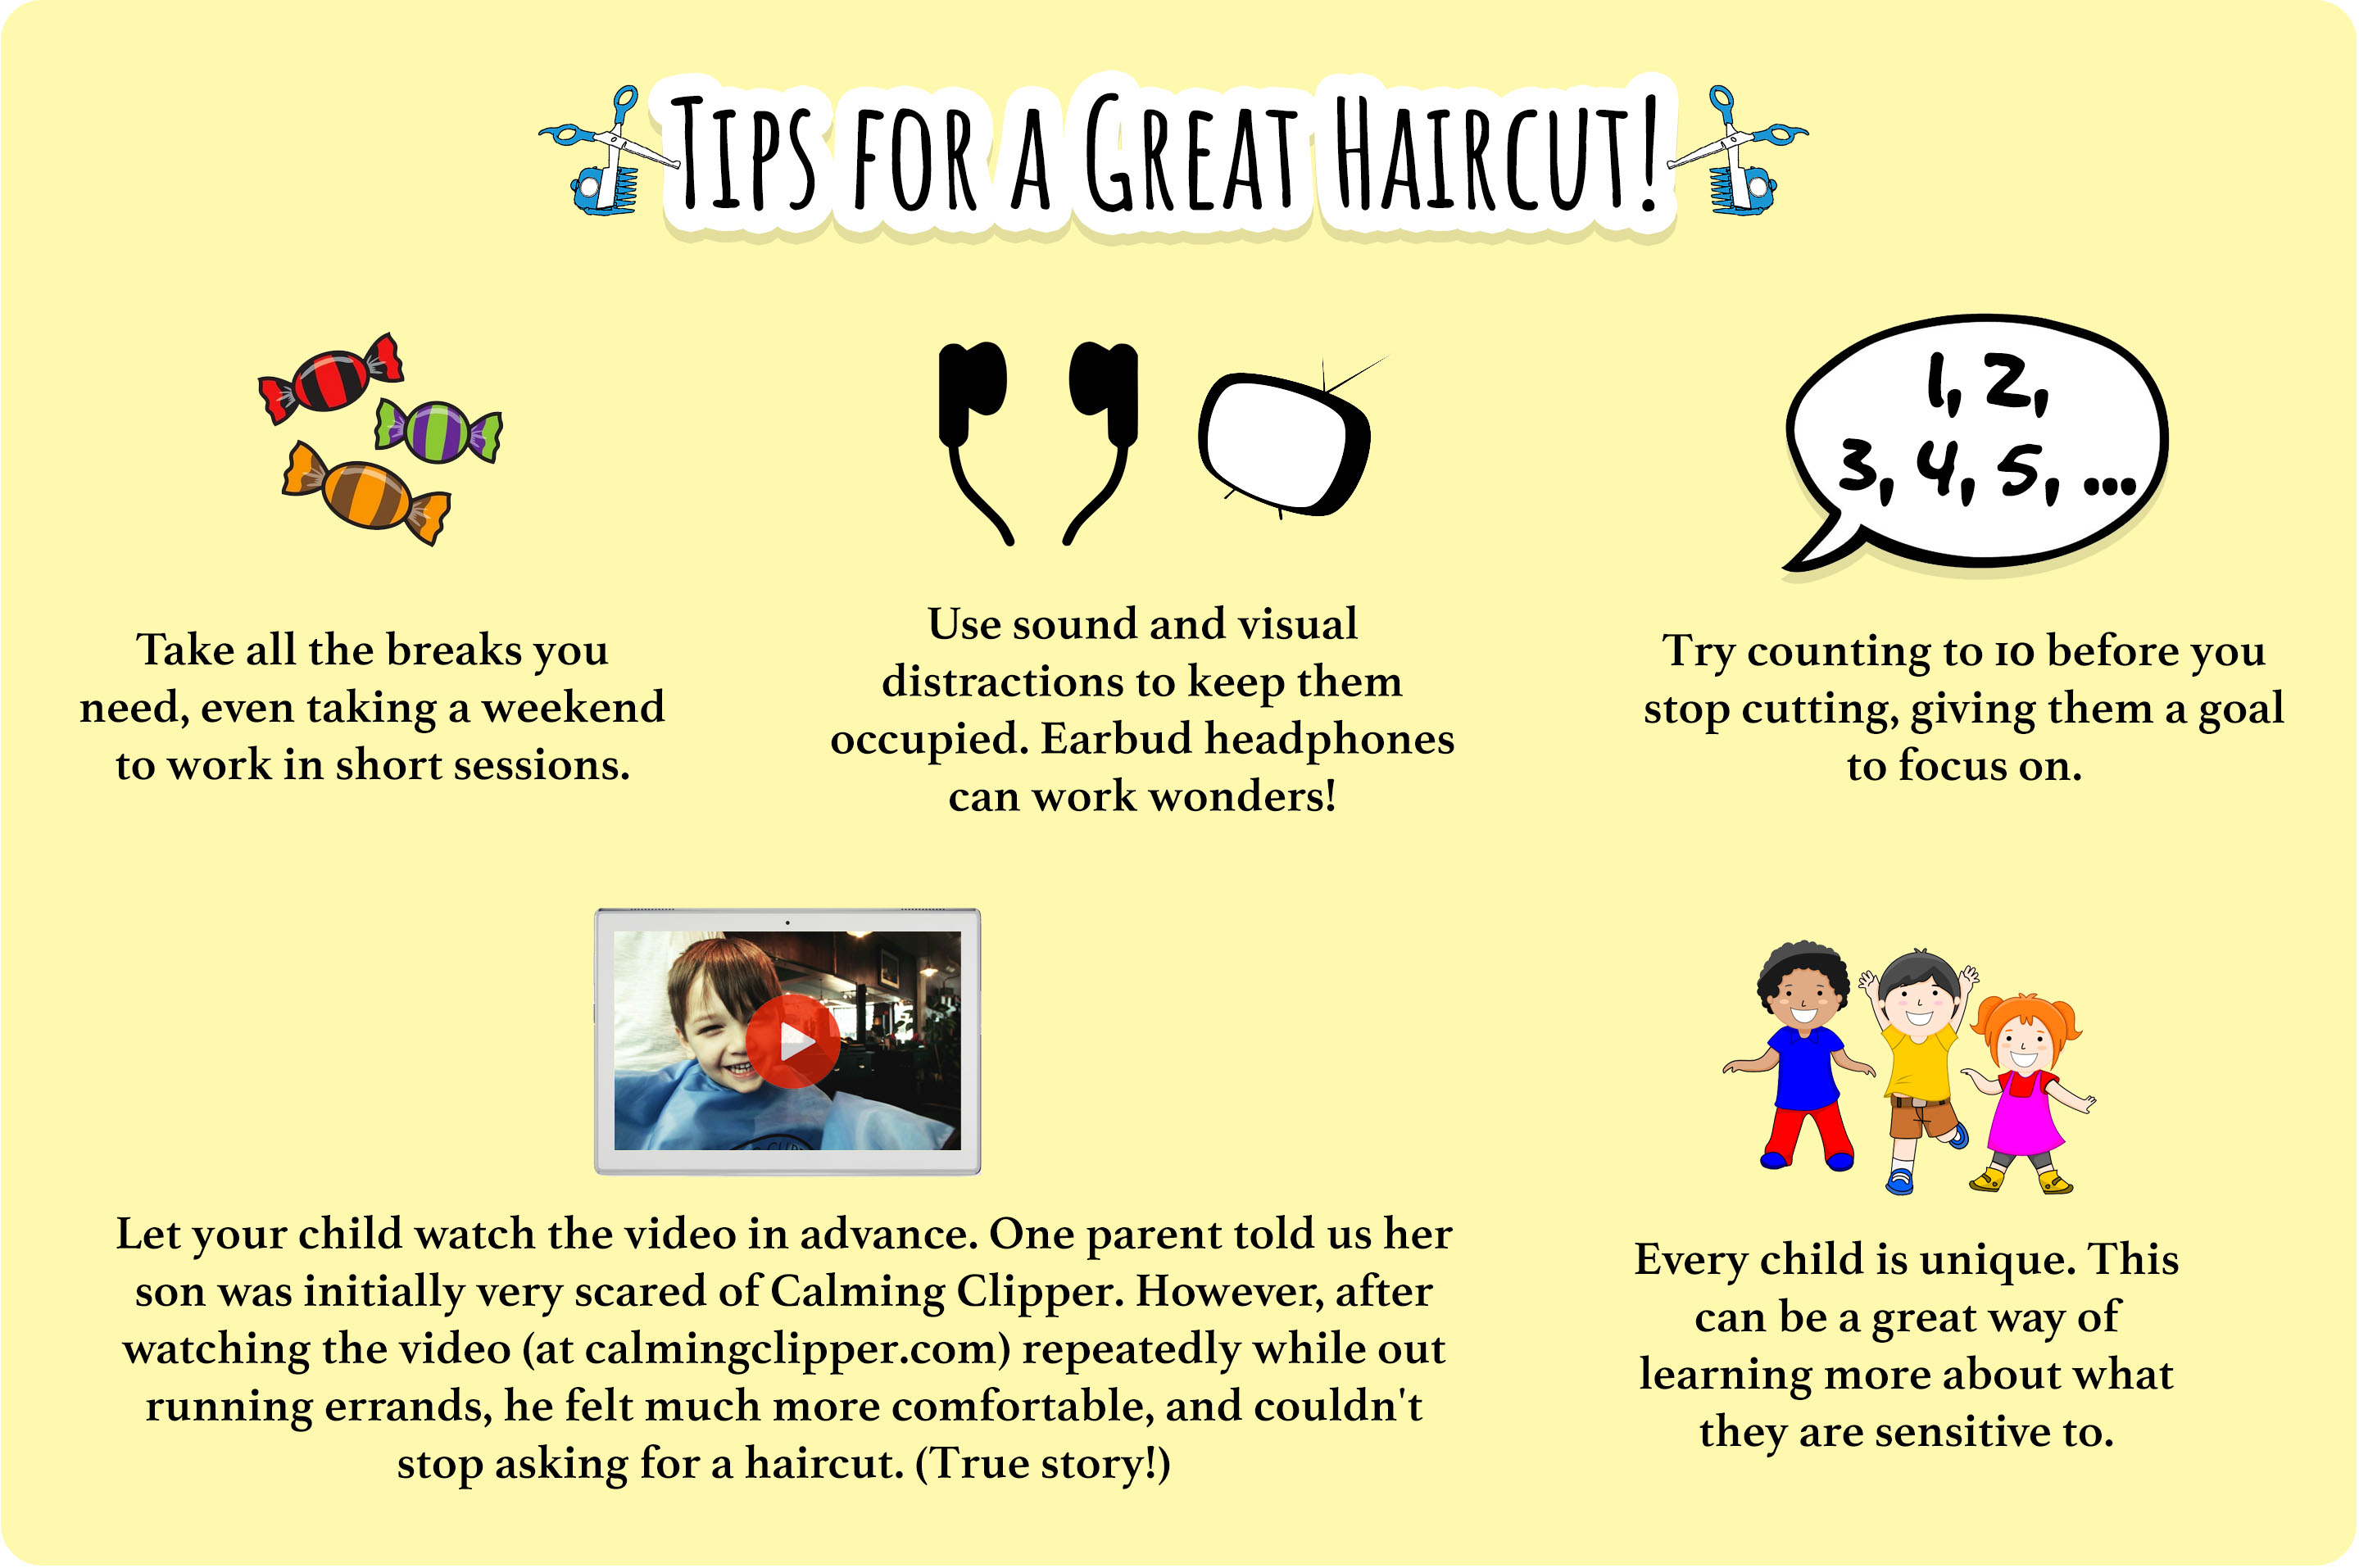 Tips for a Great Haircut infographic